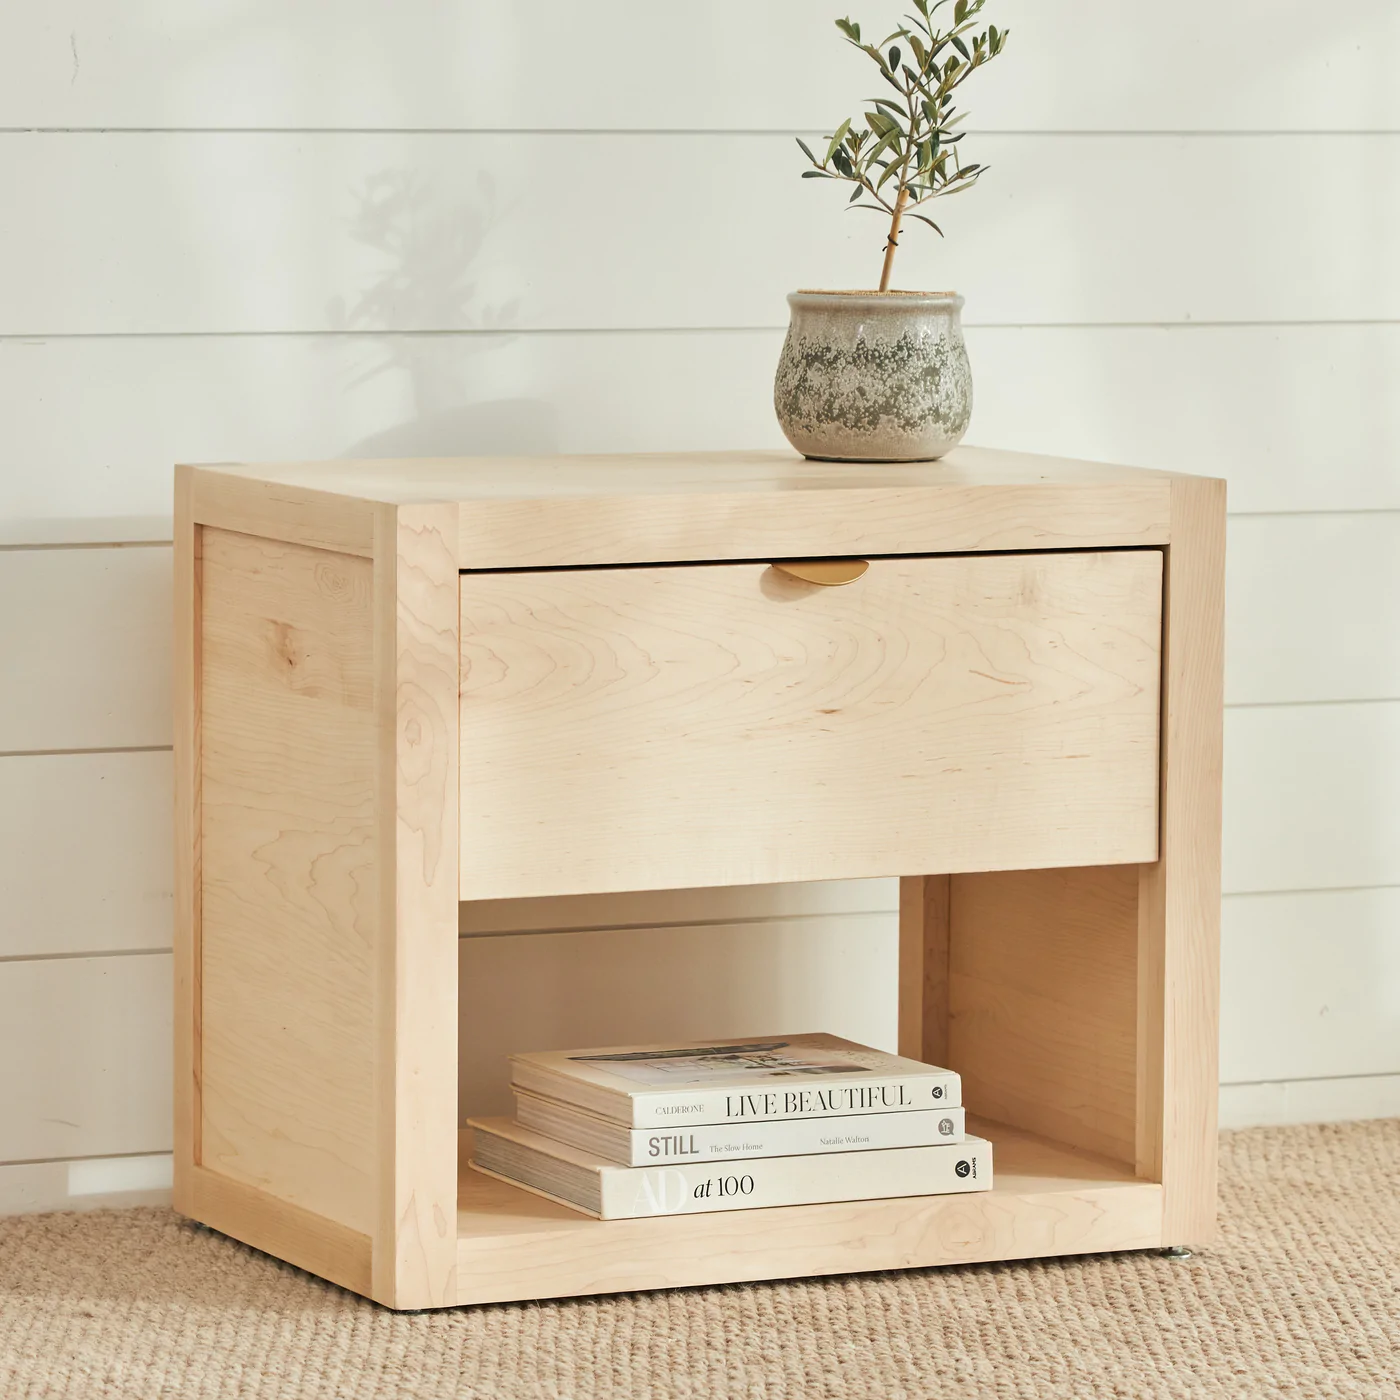 Light-colred maple night stand with small metal pull; books stacked within. Plant in gray pot on top; white eall with horizontal panels behind; beige textured rug below.